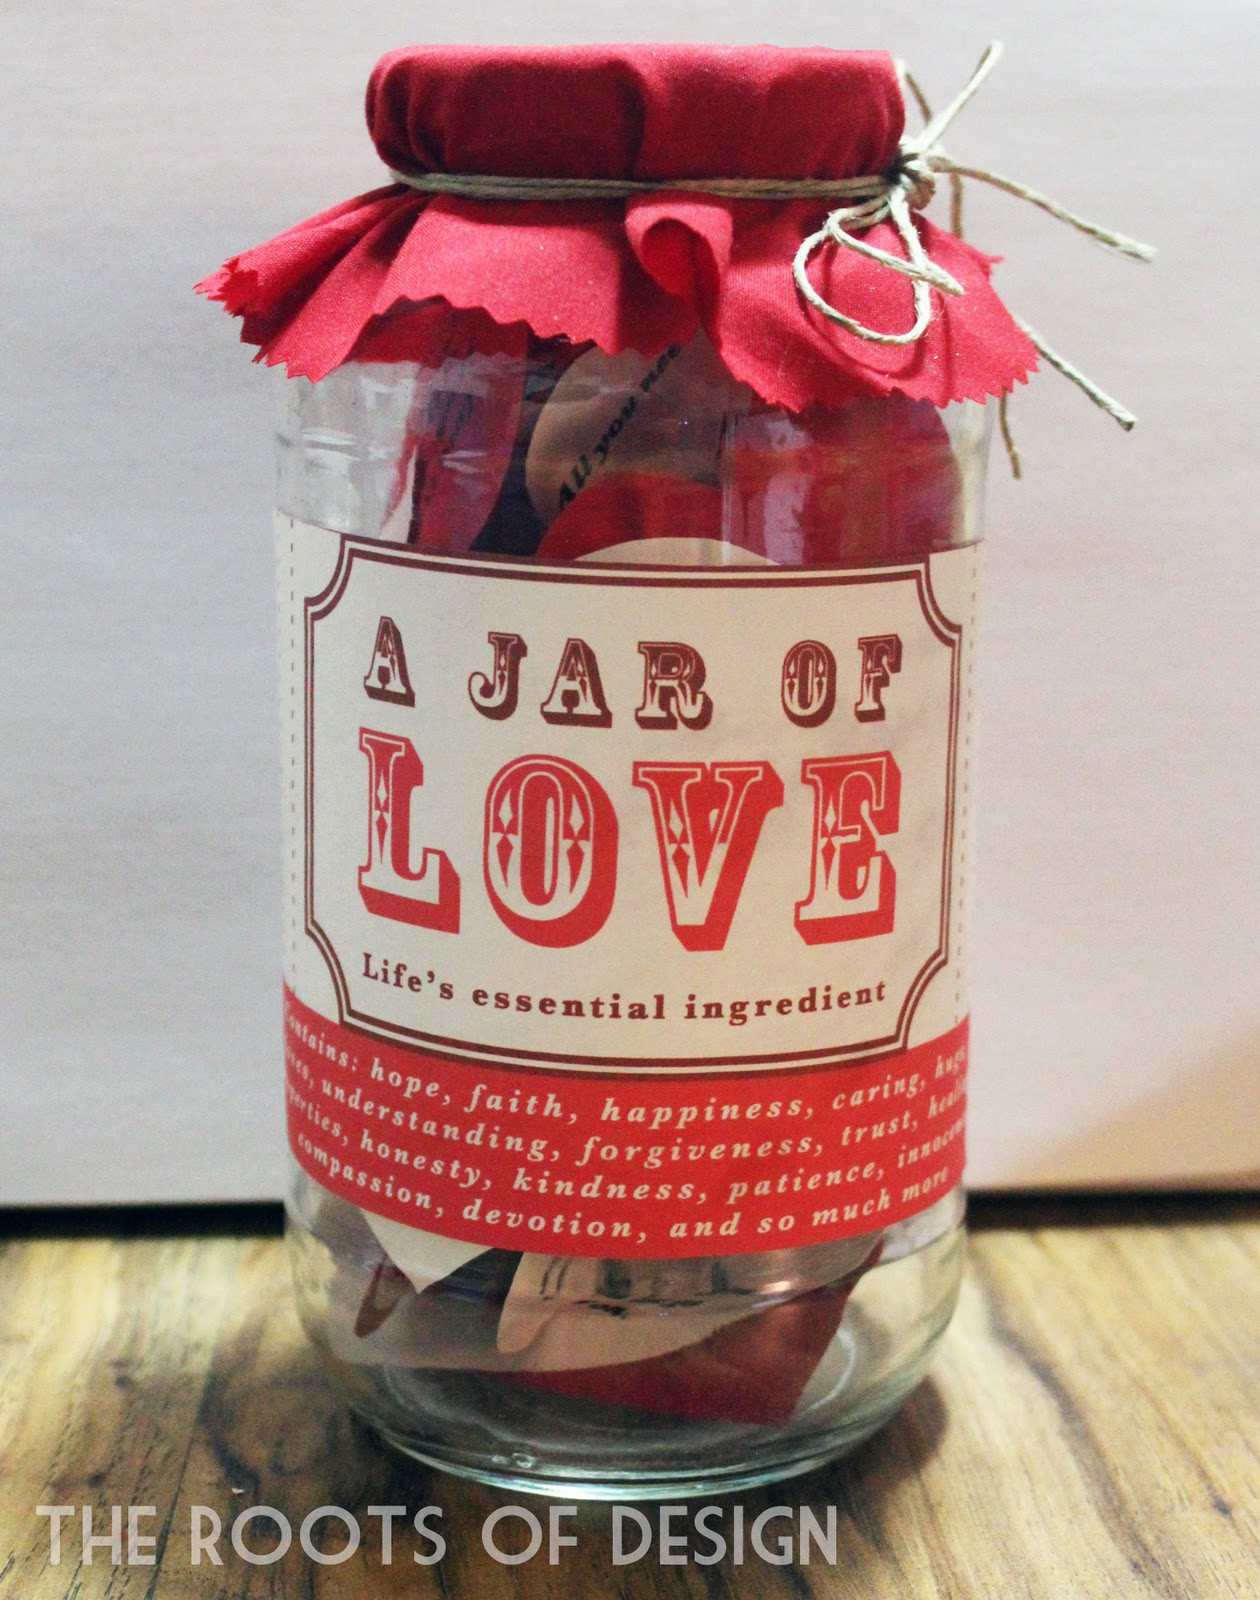 Valentines Gift Baskets For Him Ideas
 Super Cute Ideas for Personal and Quirky Valentine s Day